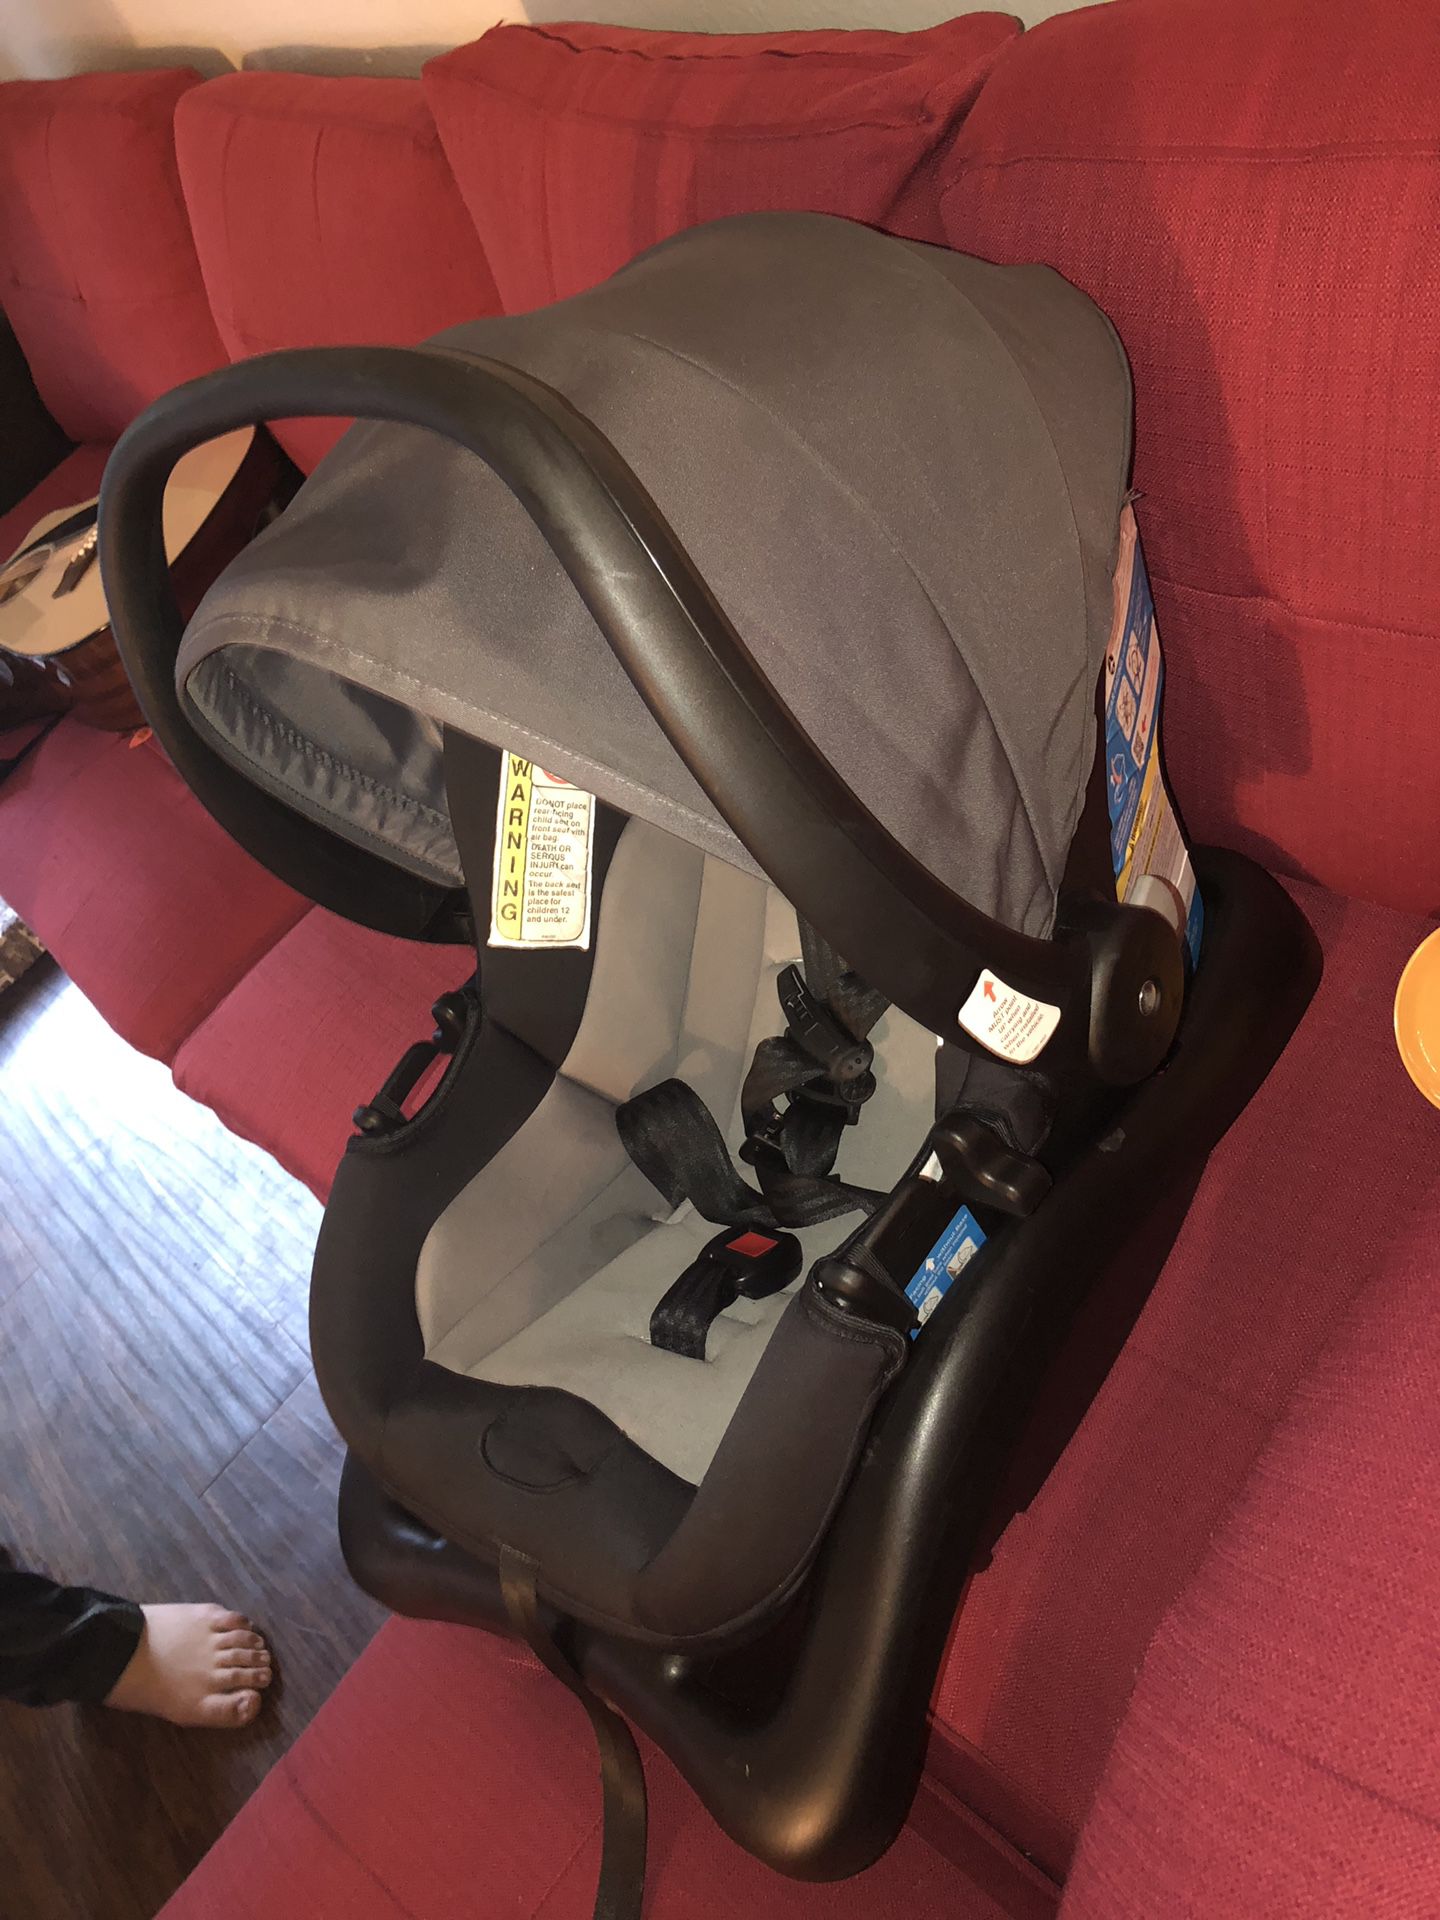 Car seat safety and stroller